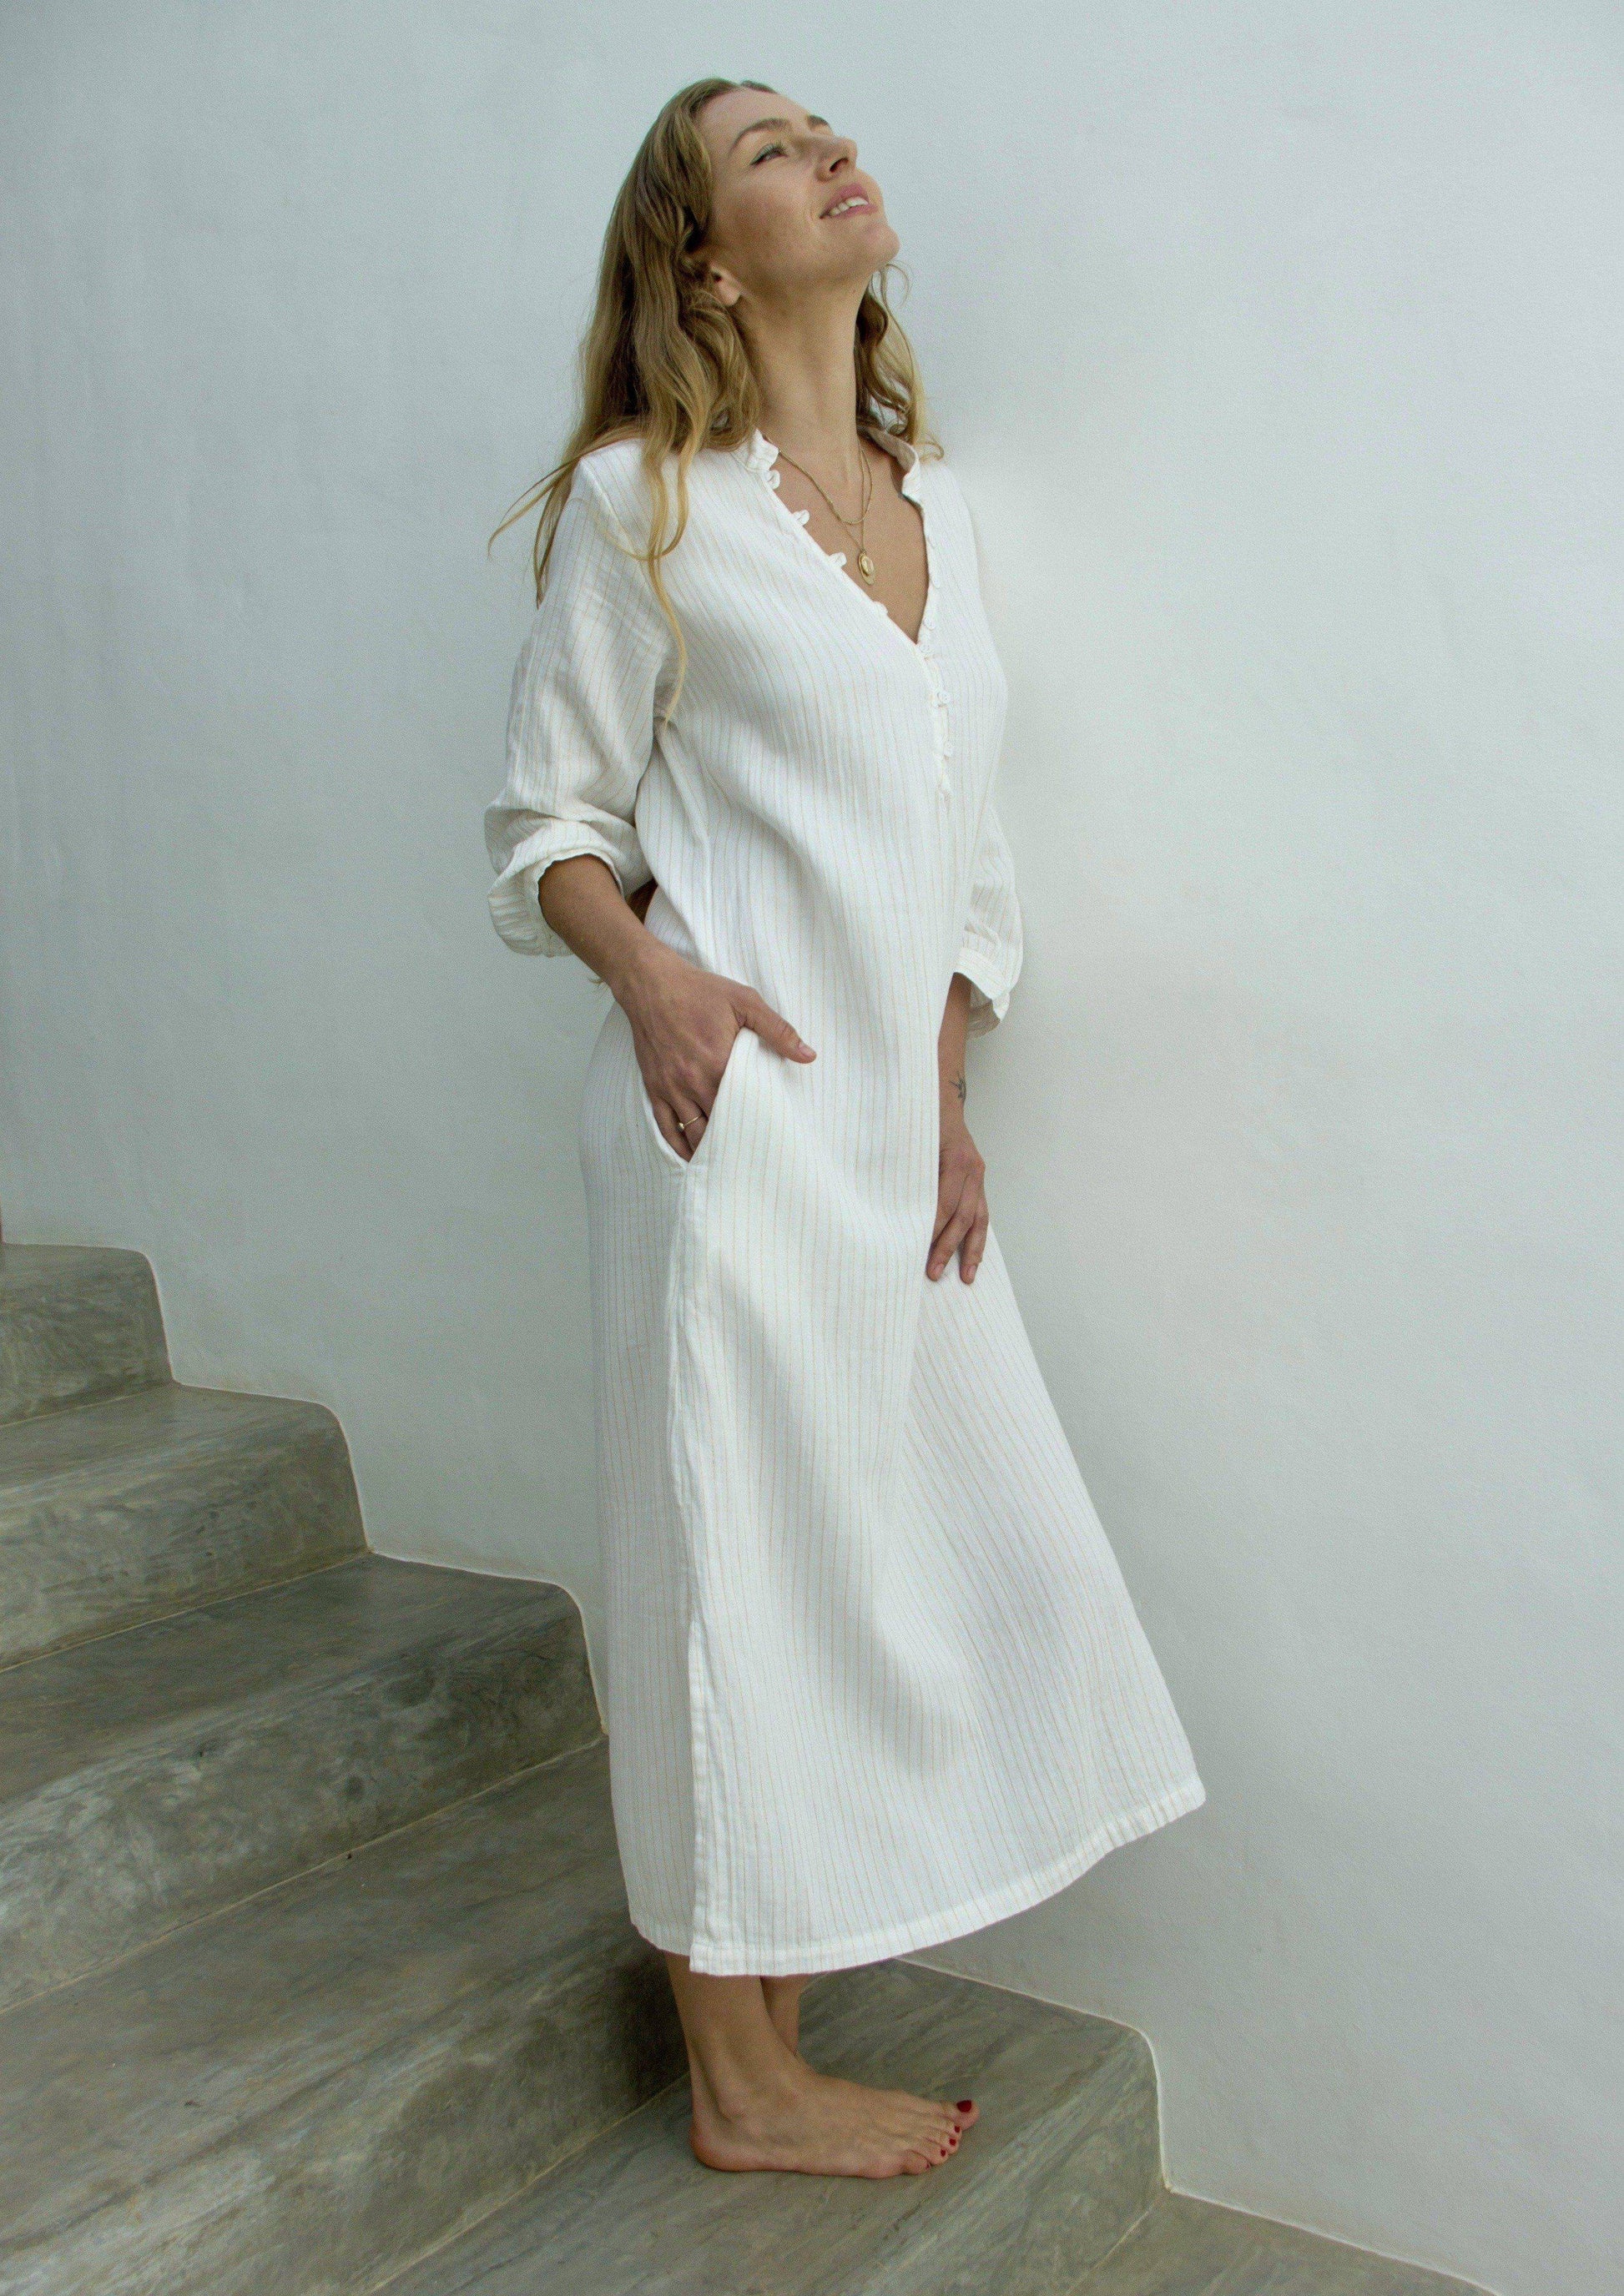 FRESNO dress • Soft cotton three-quarter-length dress featuring a button loop placket v-shaped neckline with mock collar, three quarter length button cuffed sleeves, side pockets, and side slits.